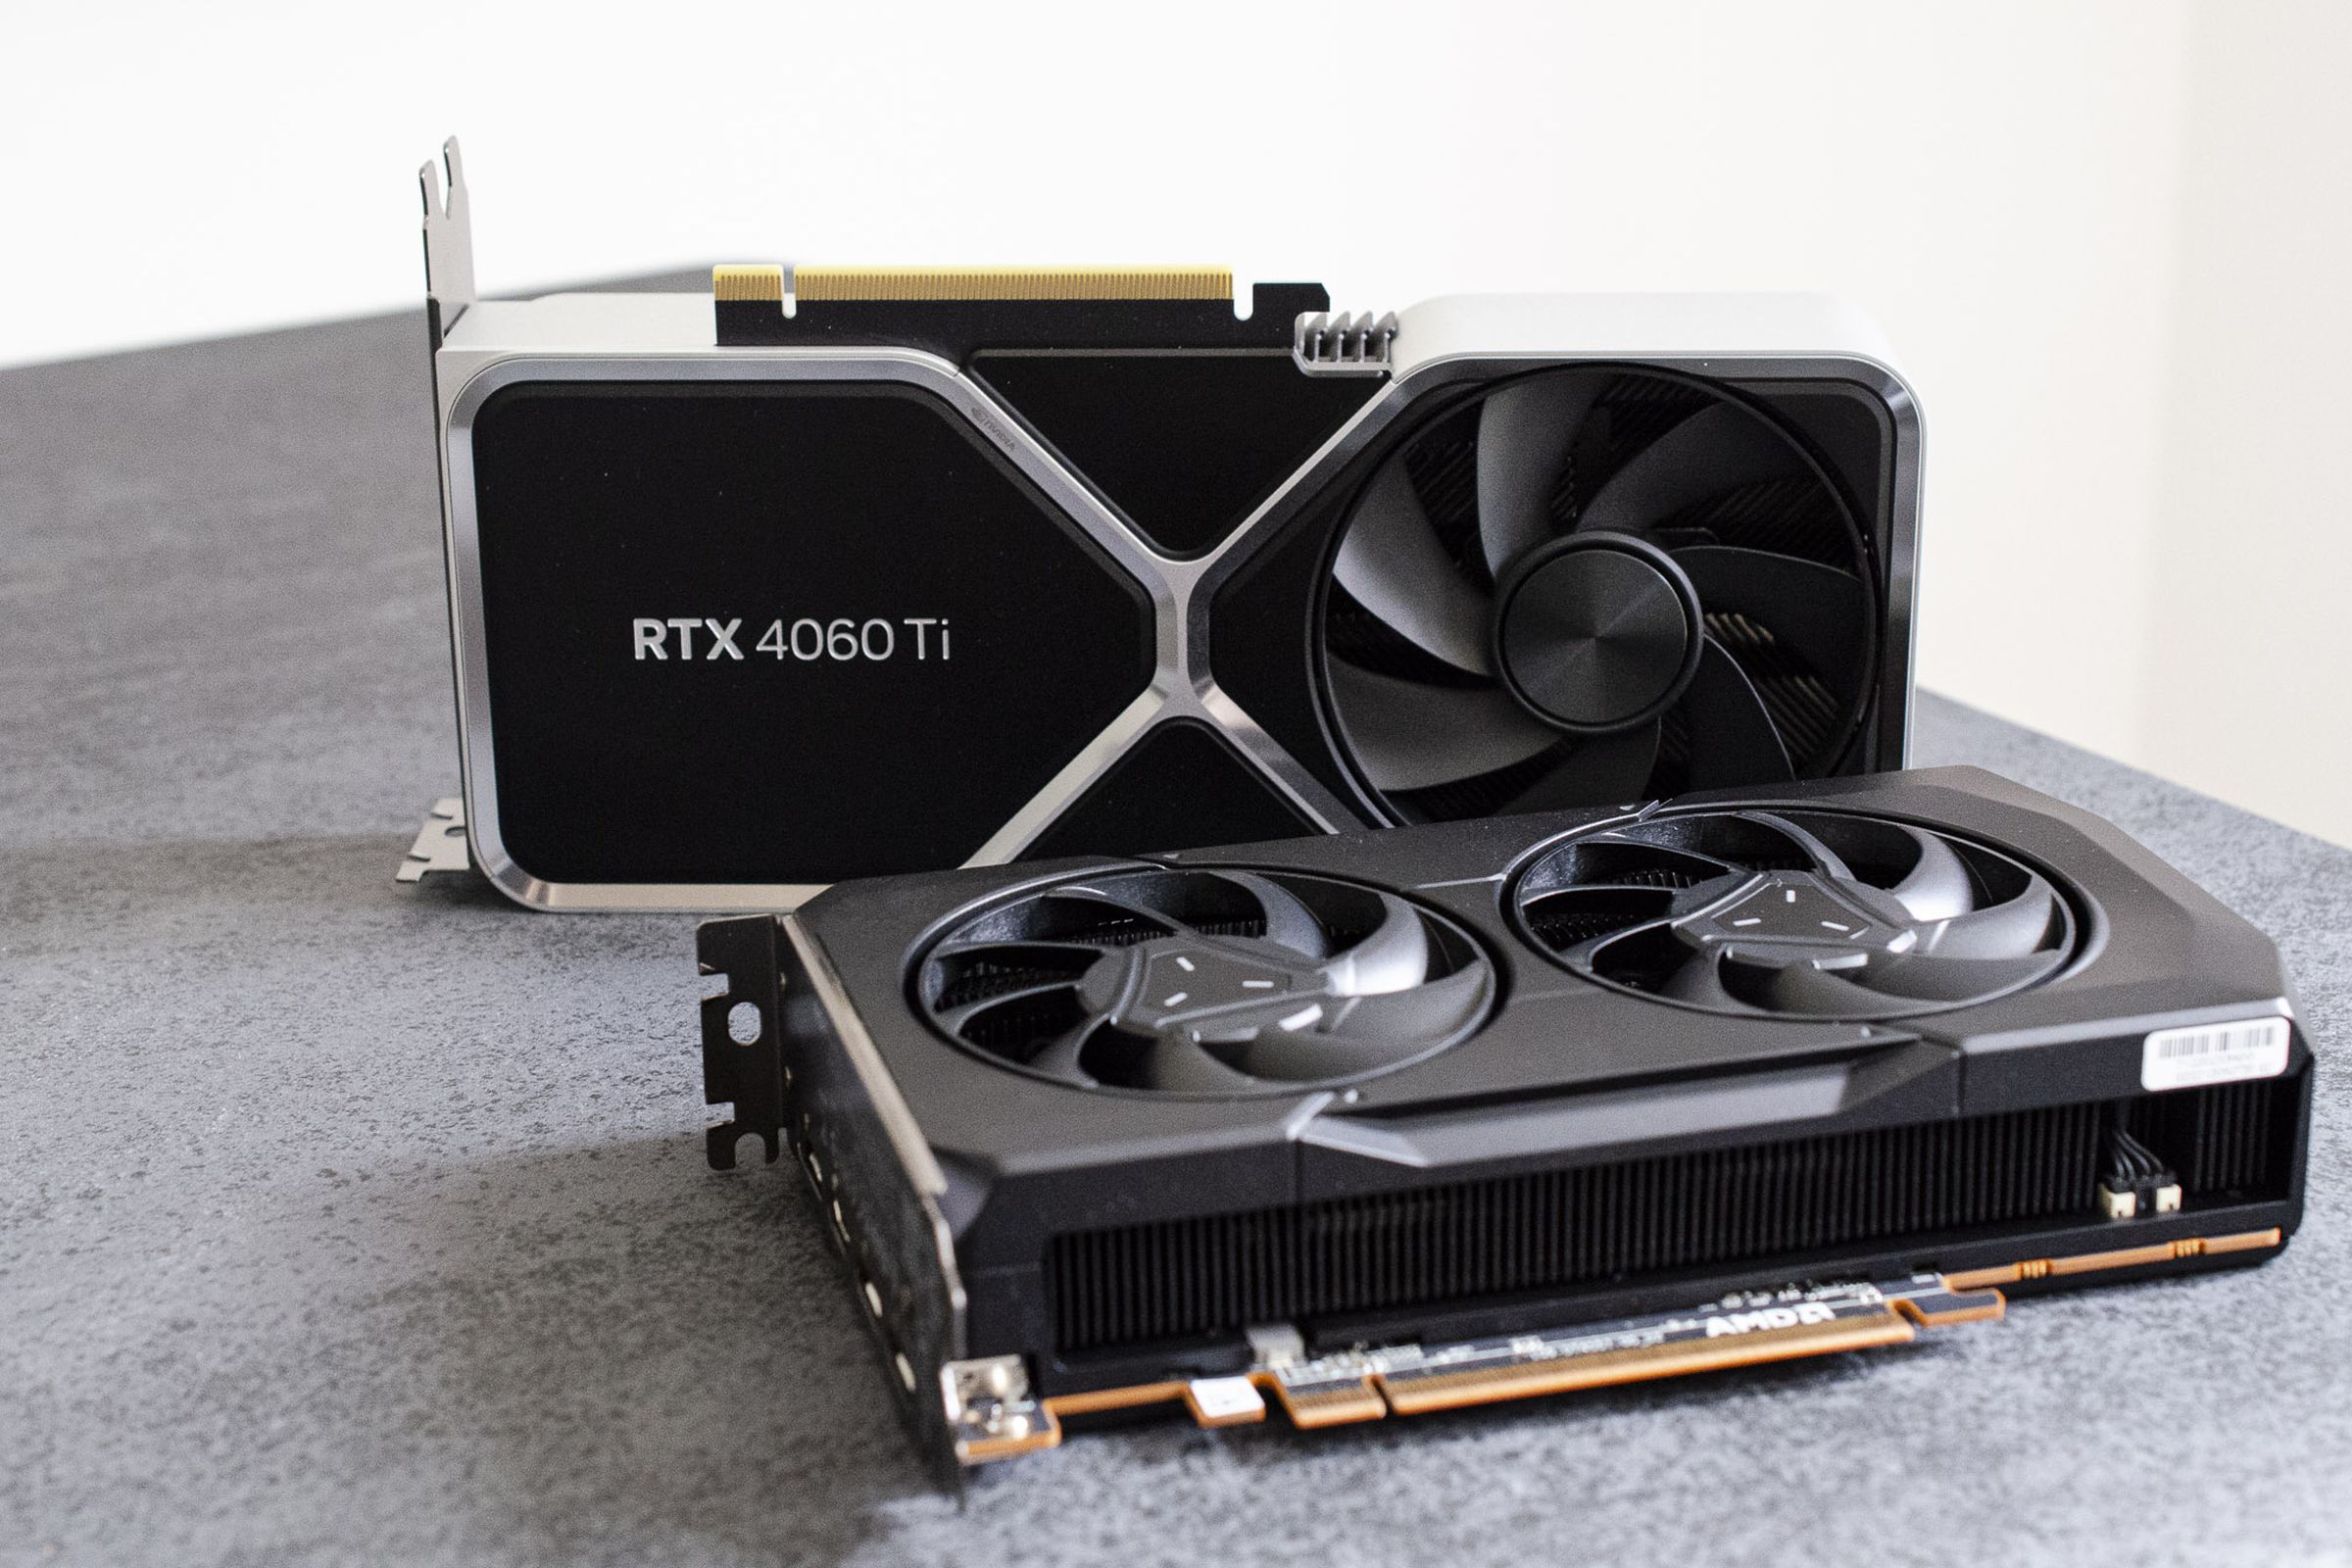 Photo of the RTX 4060 Ti and AMD’s RX 7600 graphics cards on a table